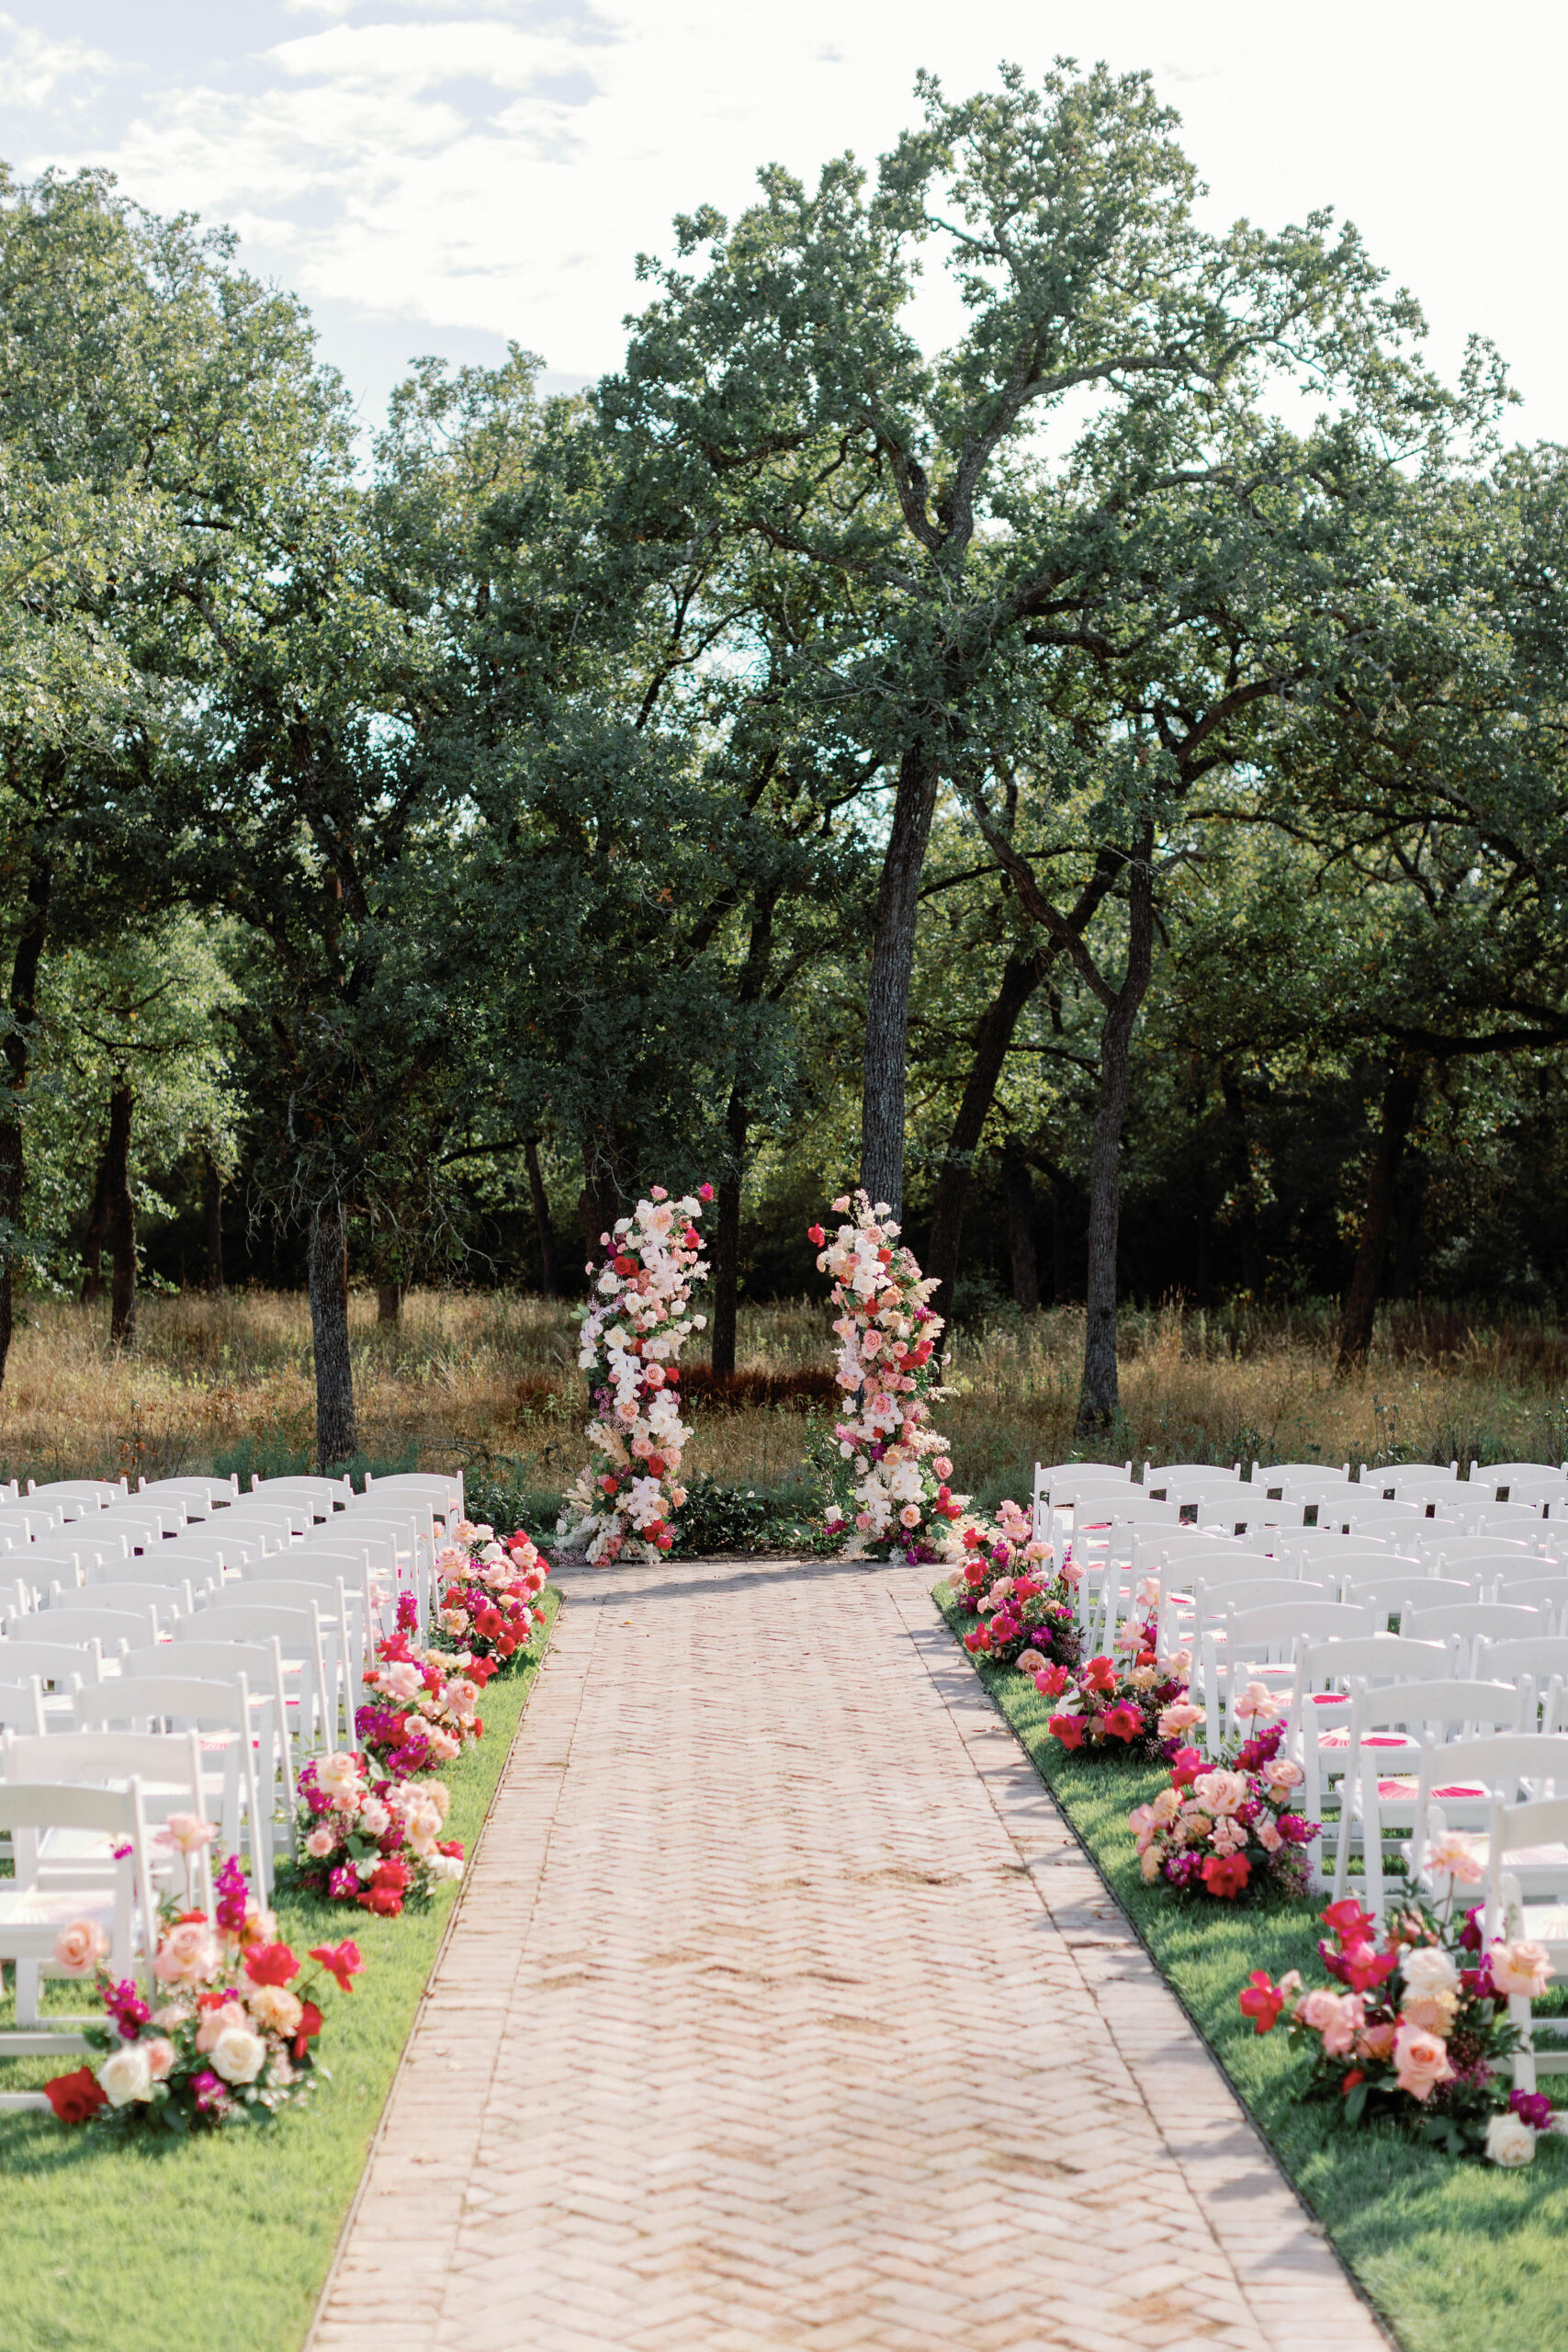 This outdoor ceremony space has a beautiful backdrop of heritage oaks. | Photo by Sarah of Sarah Block Photography